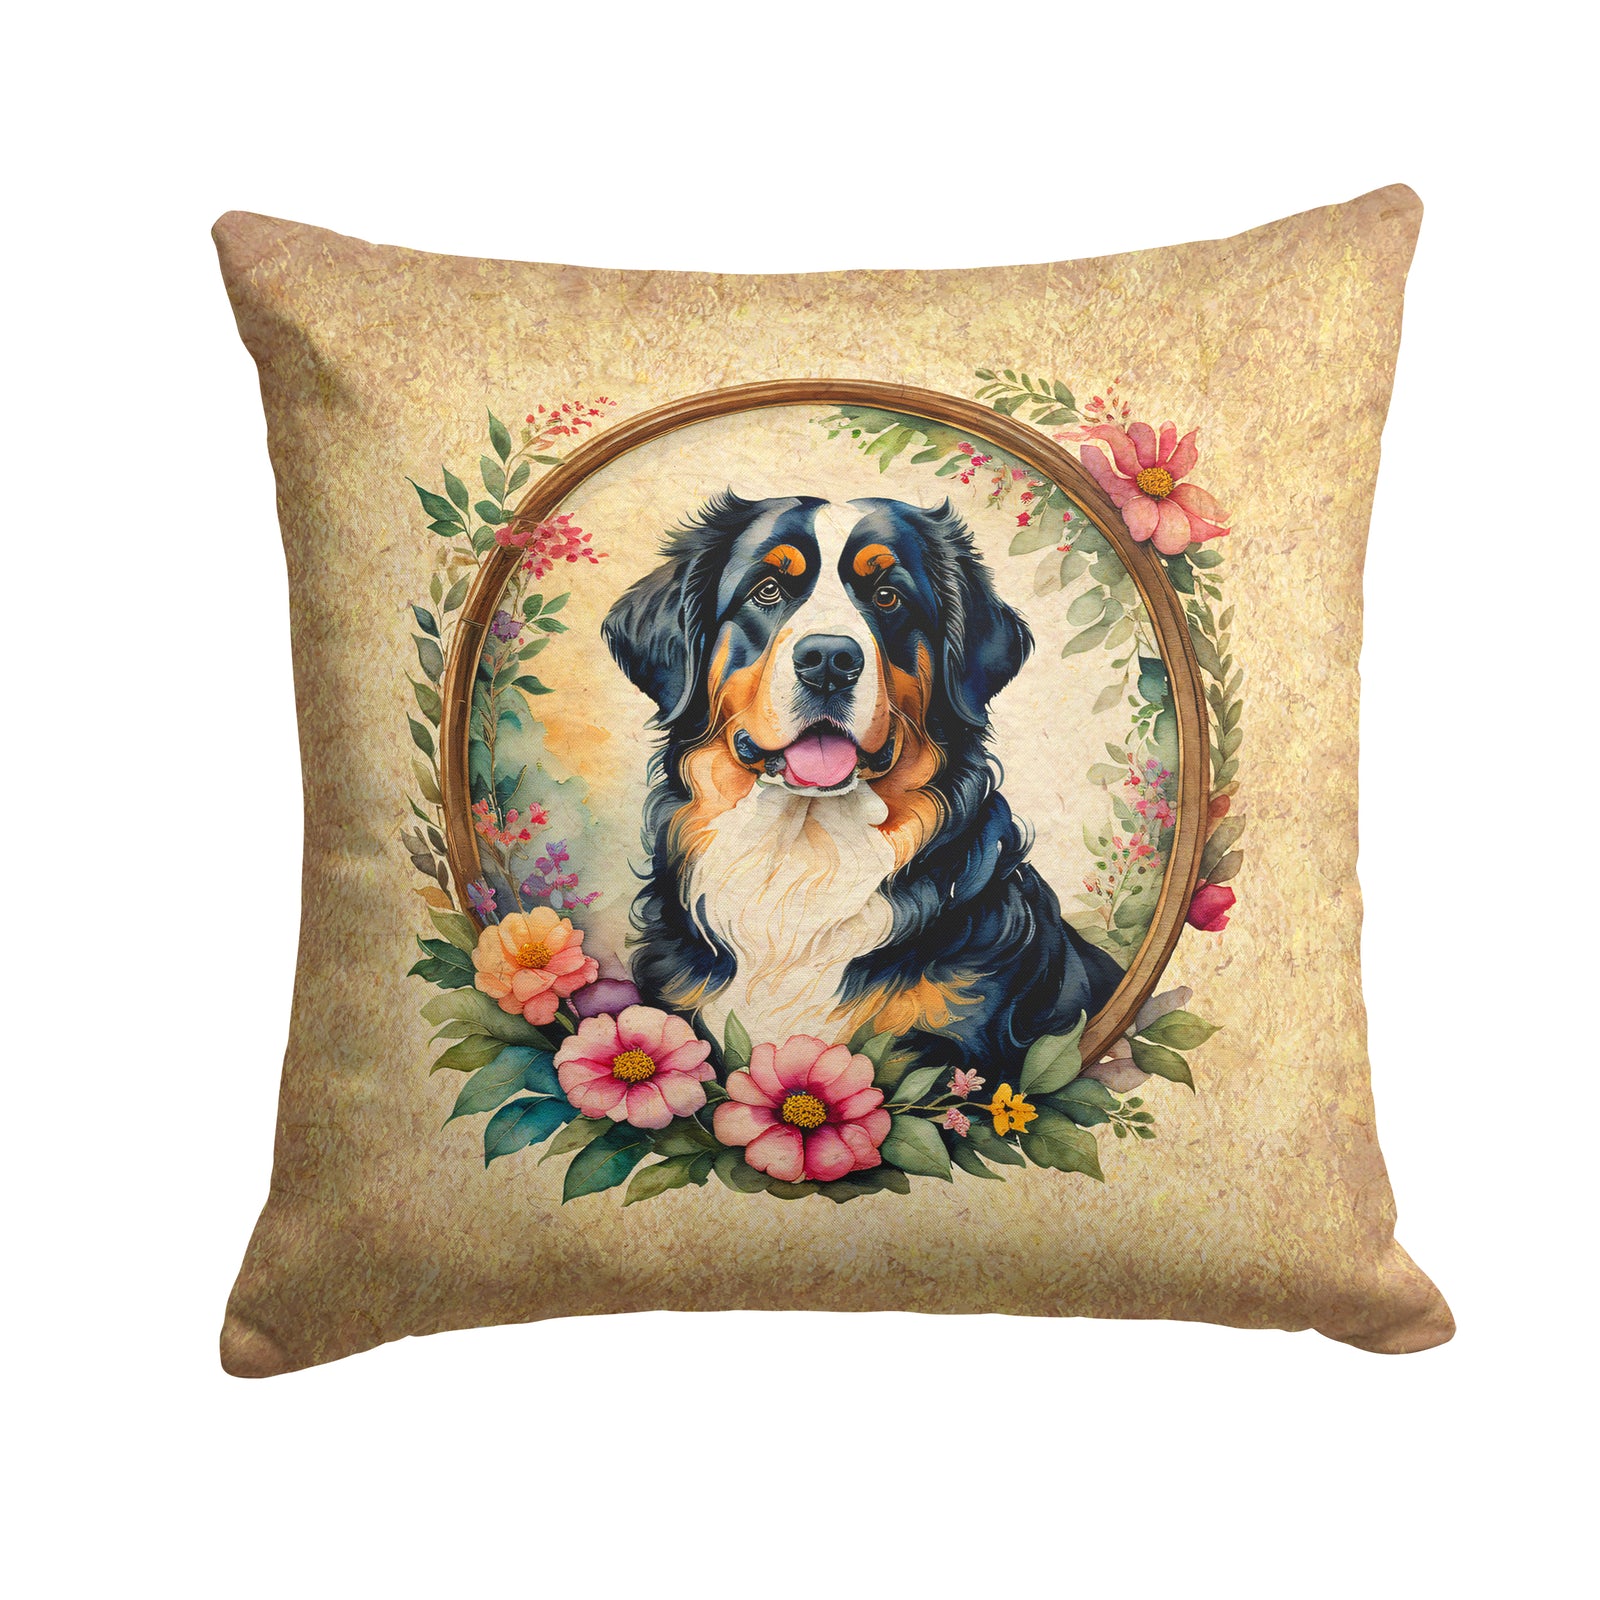 Buy this Bernese Mountain Dog and Flowers Fabric Decorative Pillow